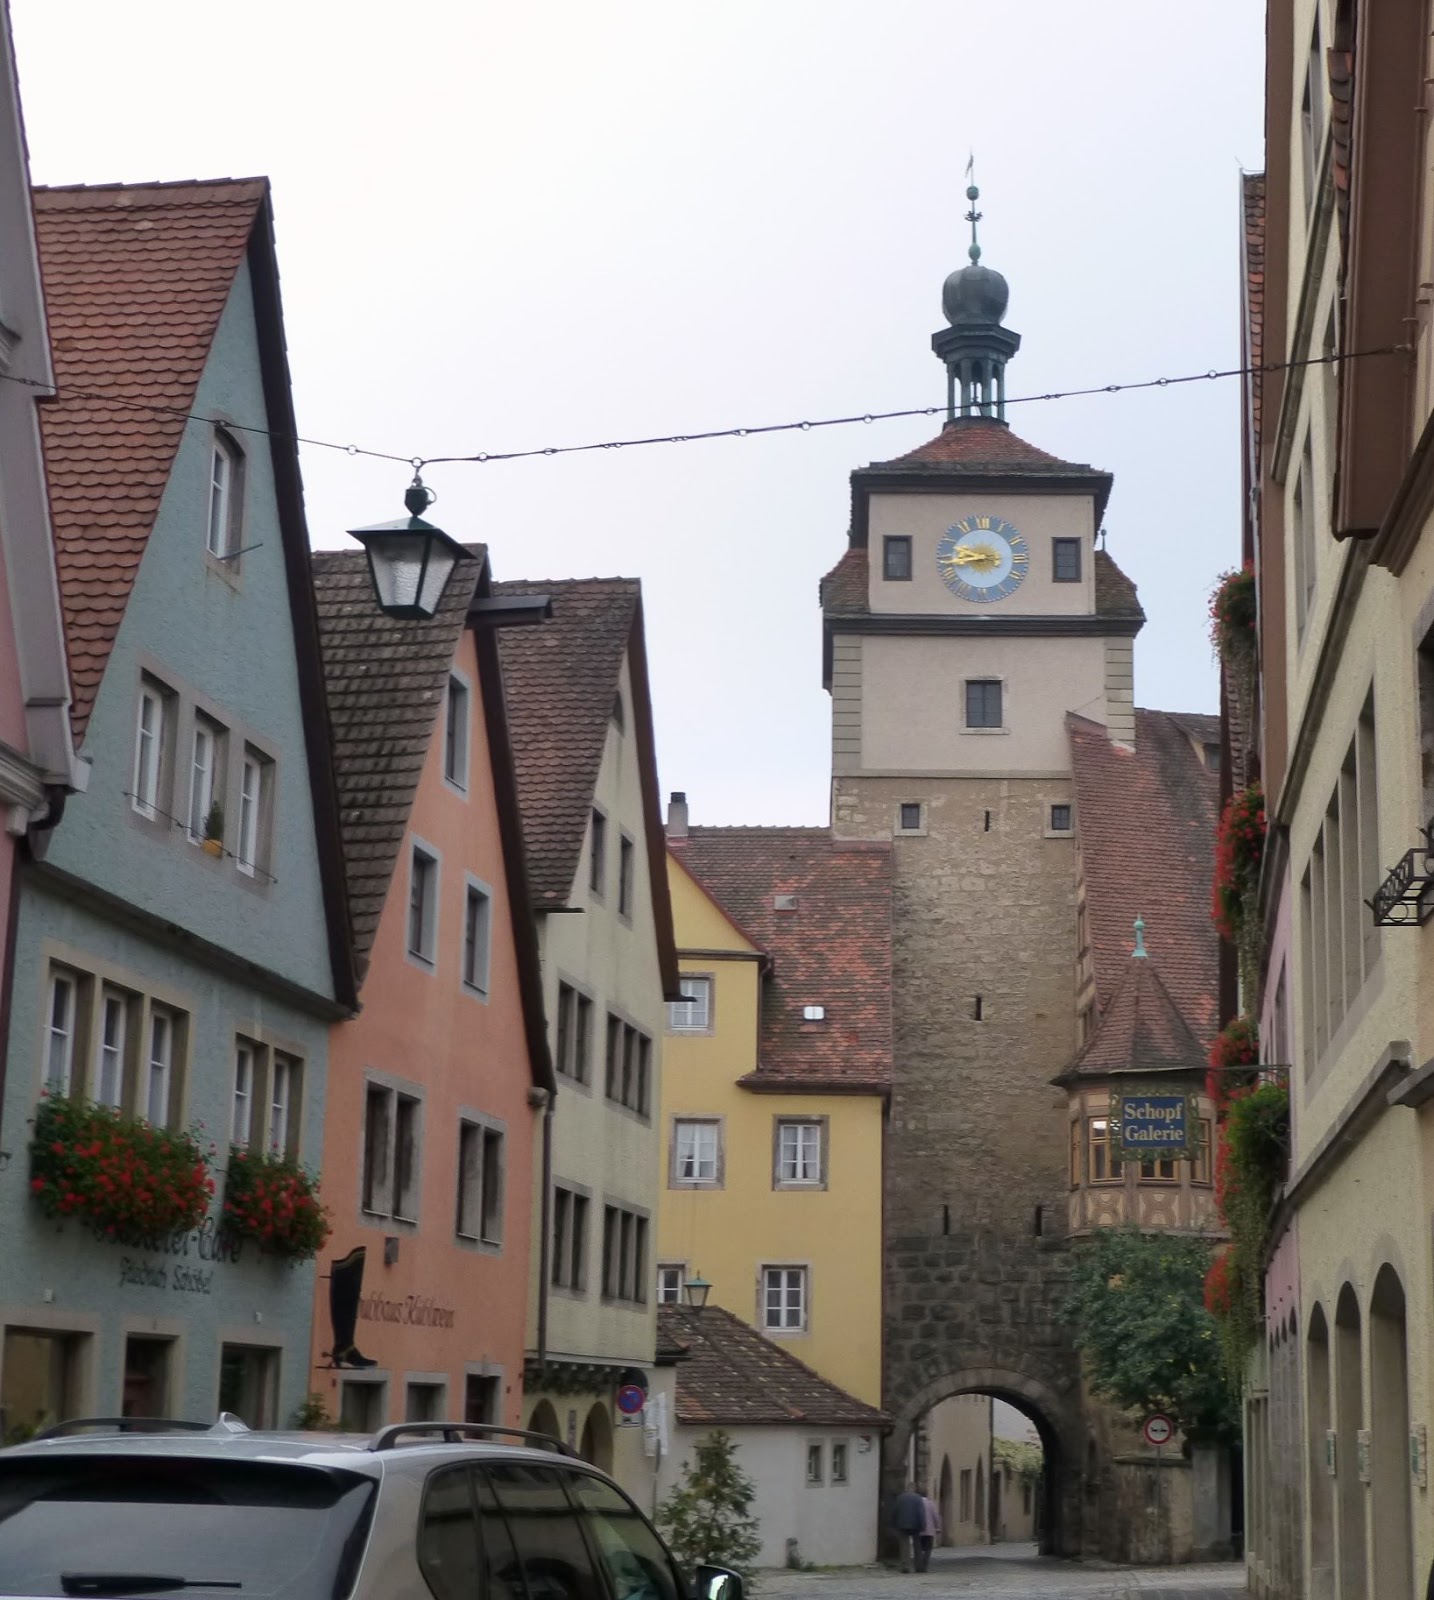 My Life in Retirement: R is for Rothenburg ob der Tauber